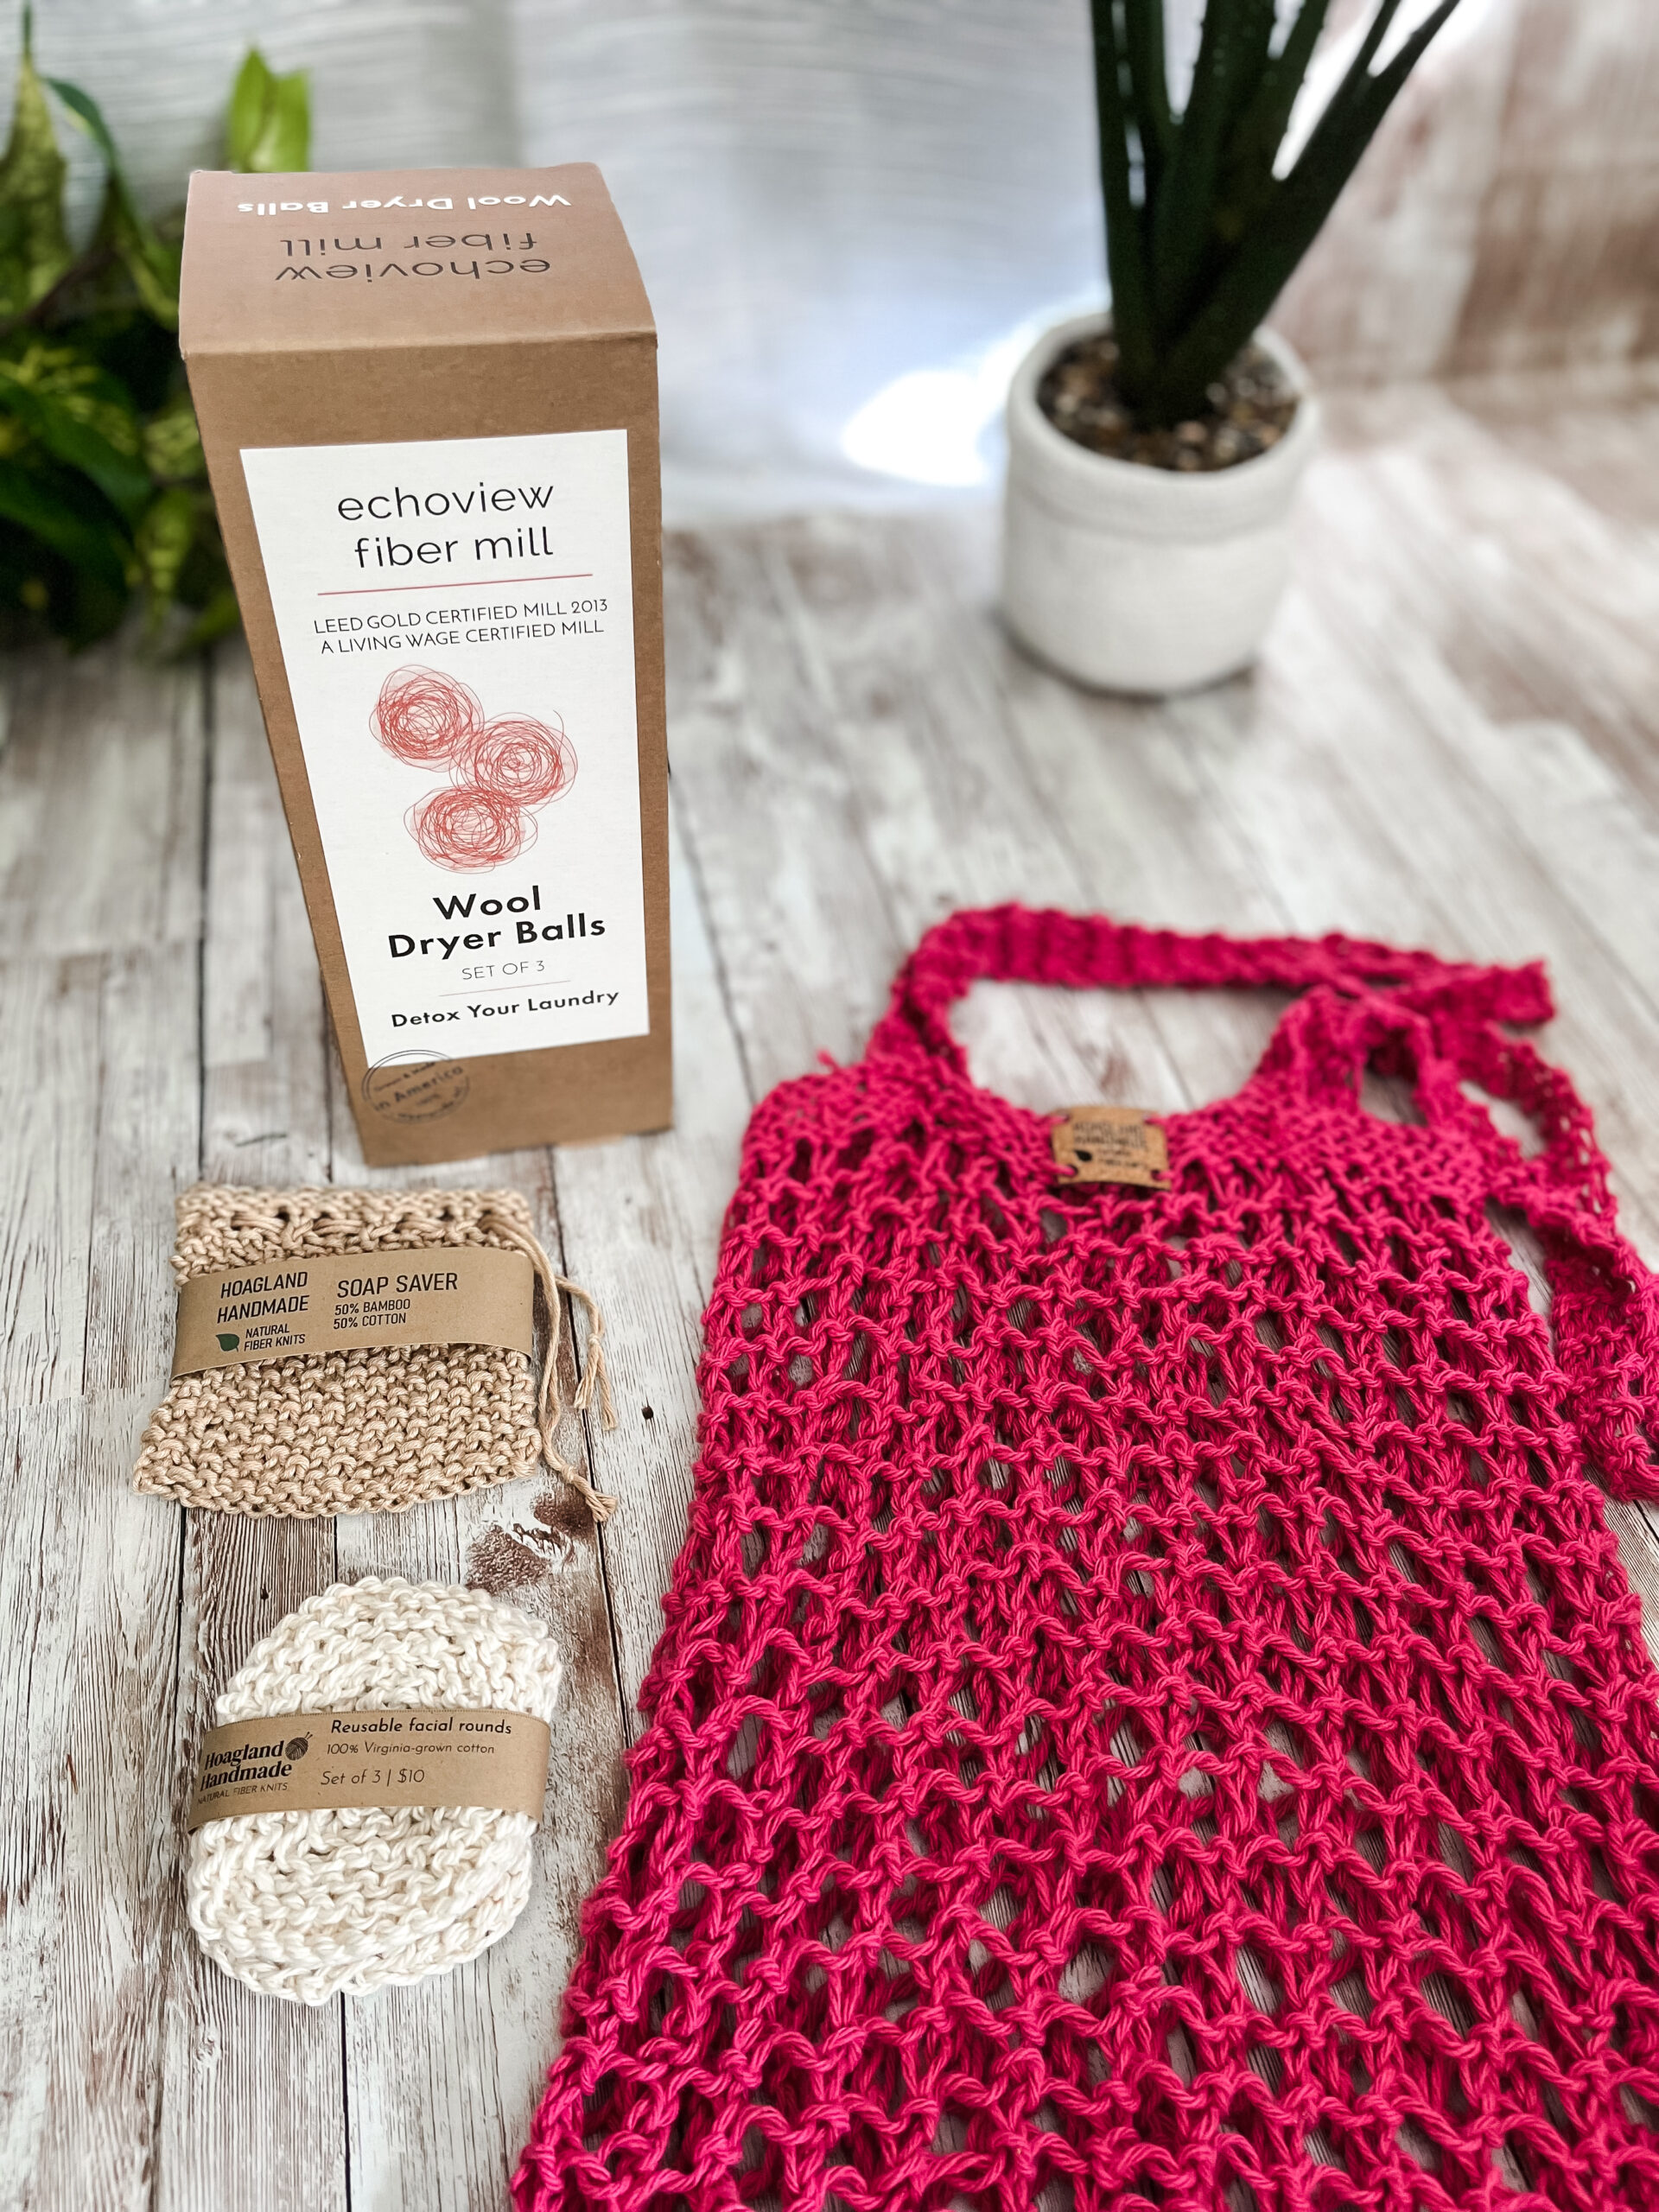 The Zero Waste gift set is pictured showing a box of 3 US Wool dryer balls, a tan bamboo/cotton soap saver pouch wrapped in a kraft paper label from Hoagland Handmade, a set of 3 usable facial rounds knit from Virginia-grown cotton and wrapped in a a kraft paper label from Hoagland Handmade, and a pink recycled cotton knit market tote